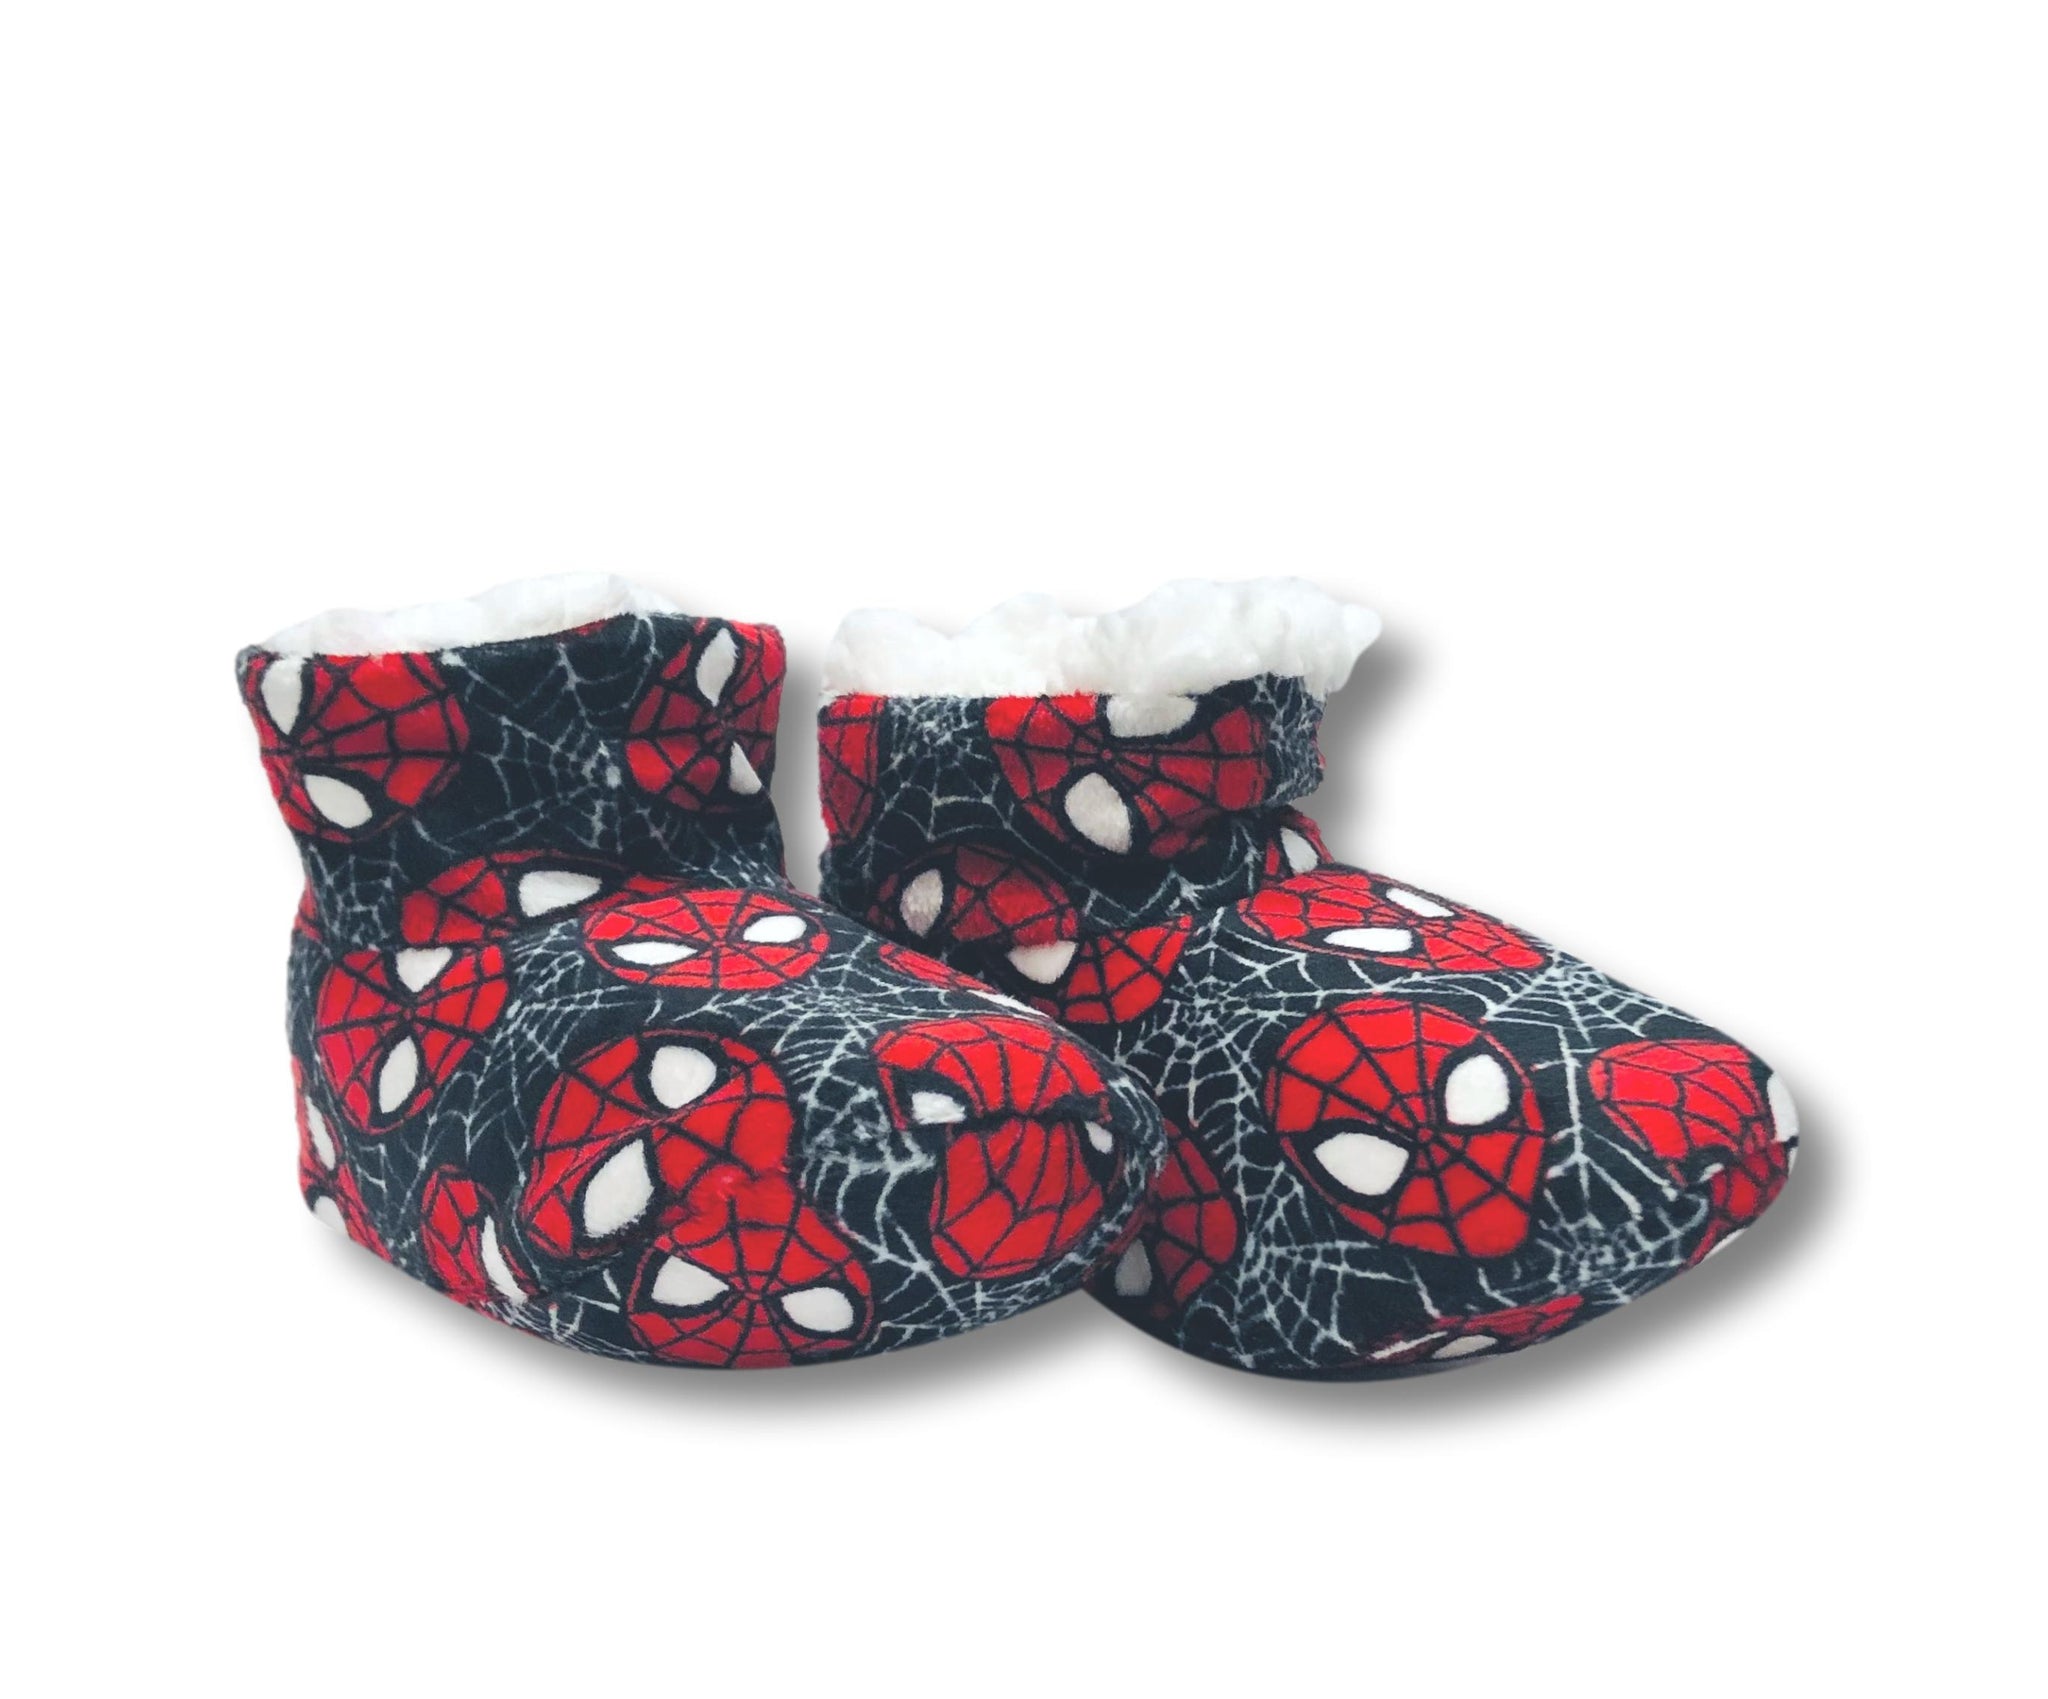 Warm children's shoes, slippers, running shoes, boots, play shoe with  motifs in the style of Spiderman, Spiderman, 5 UK Child: Amazon.co.uk:  Fashion